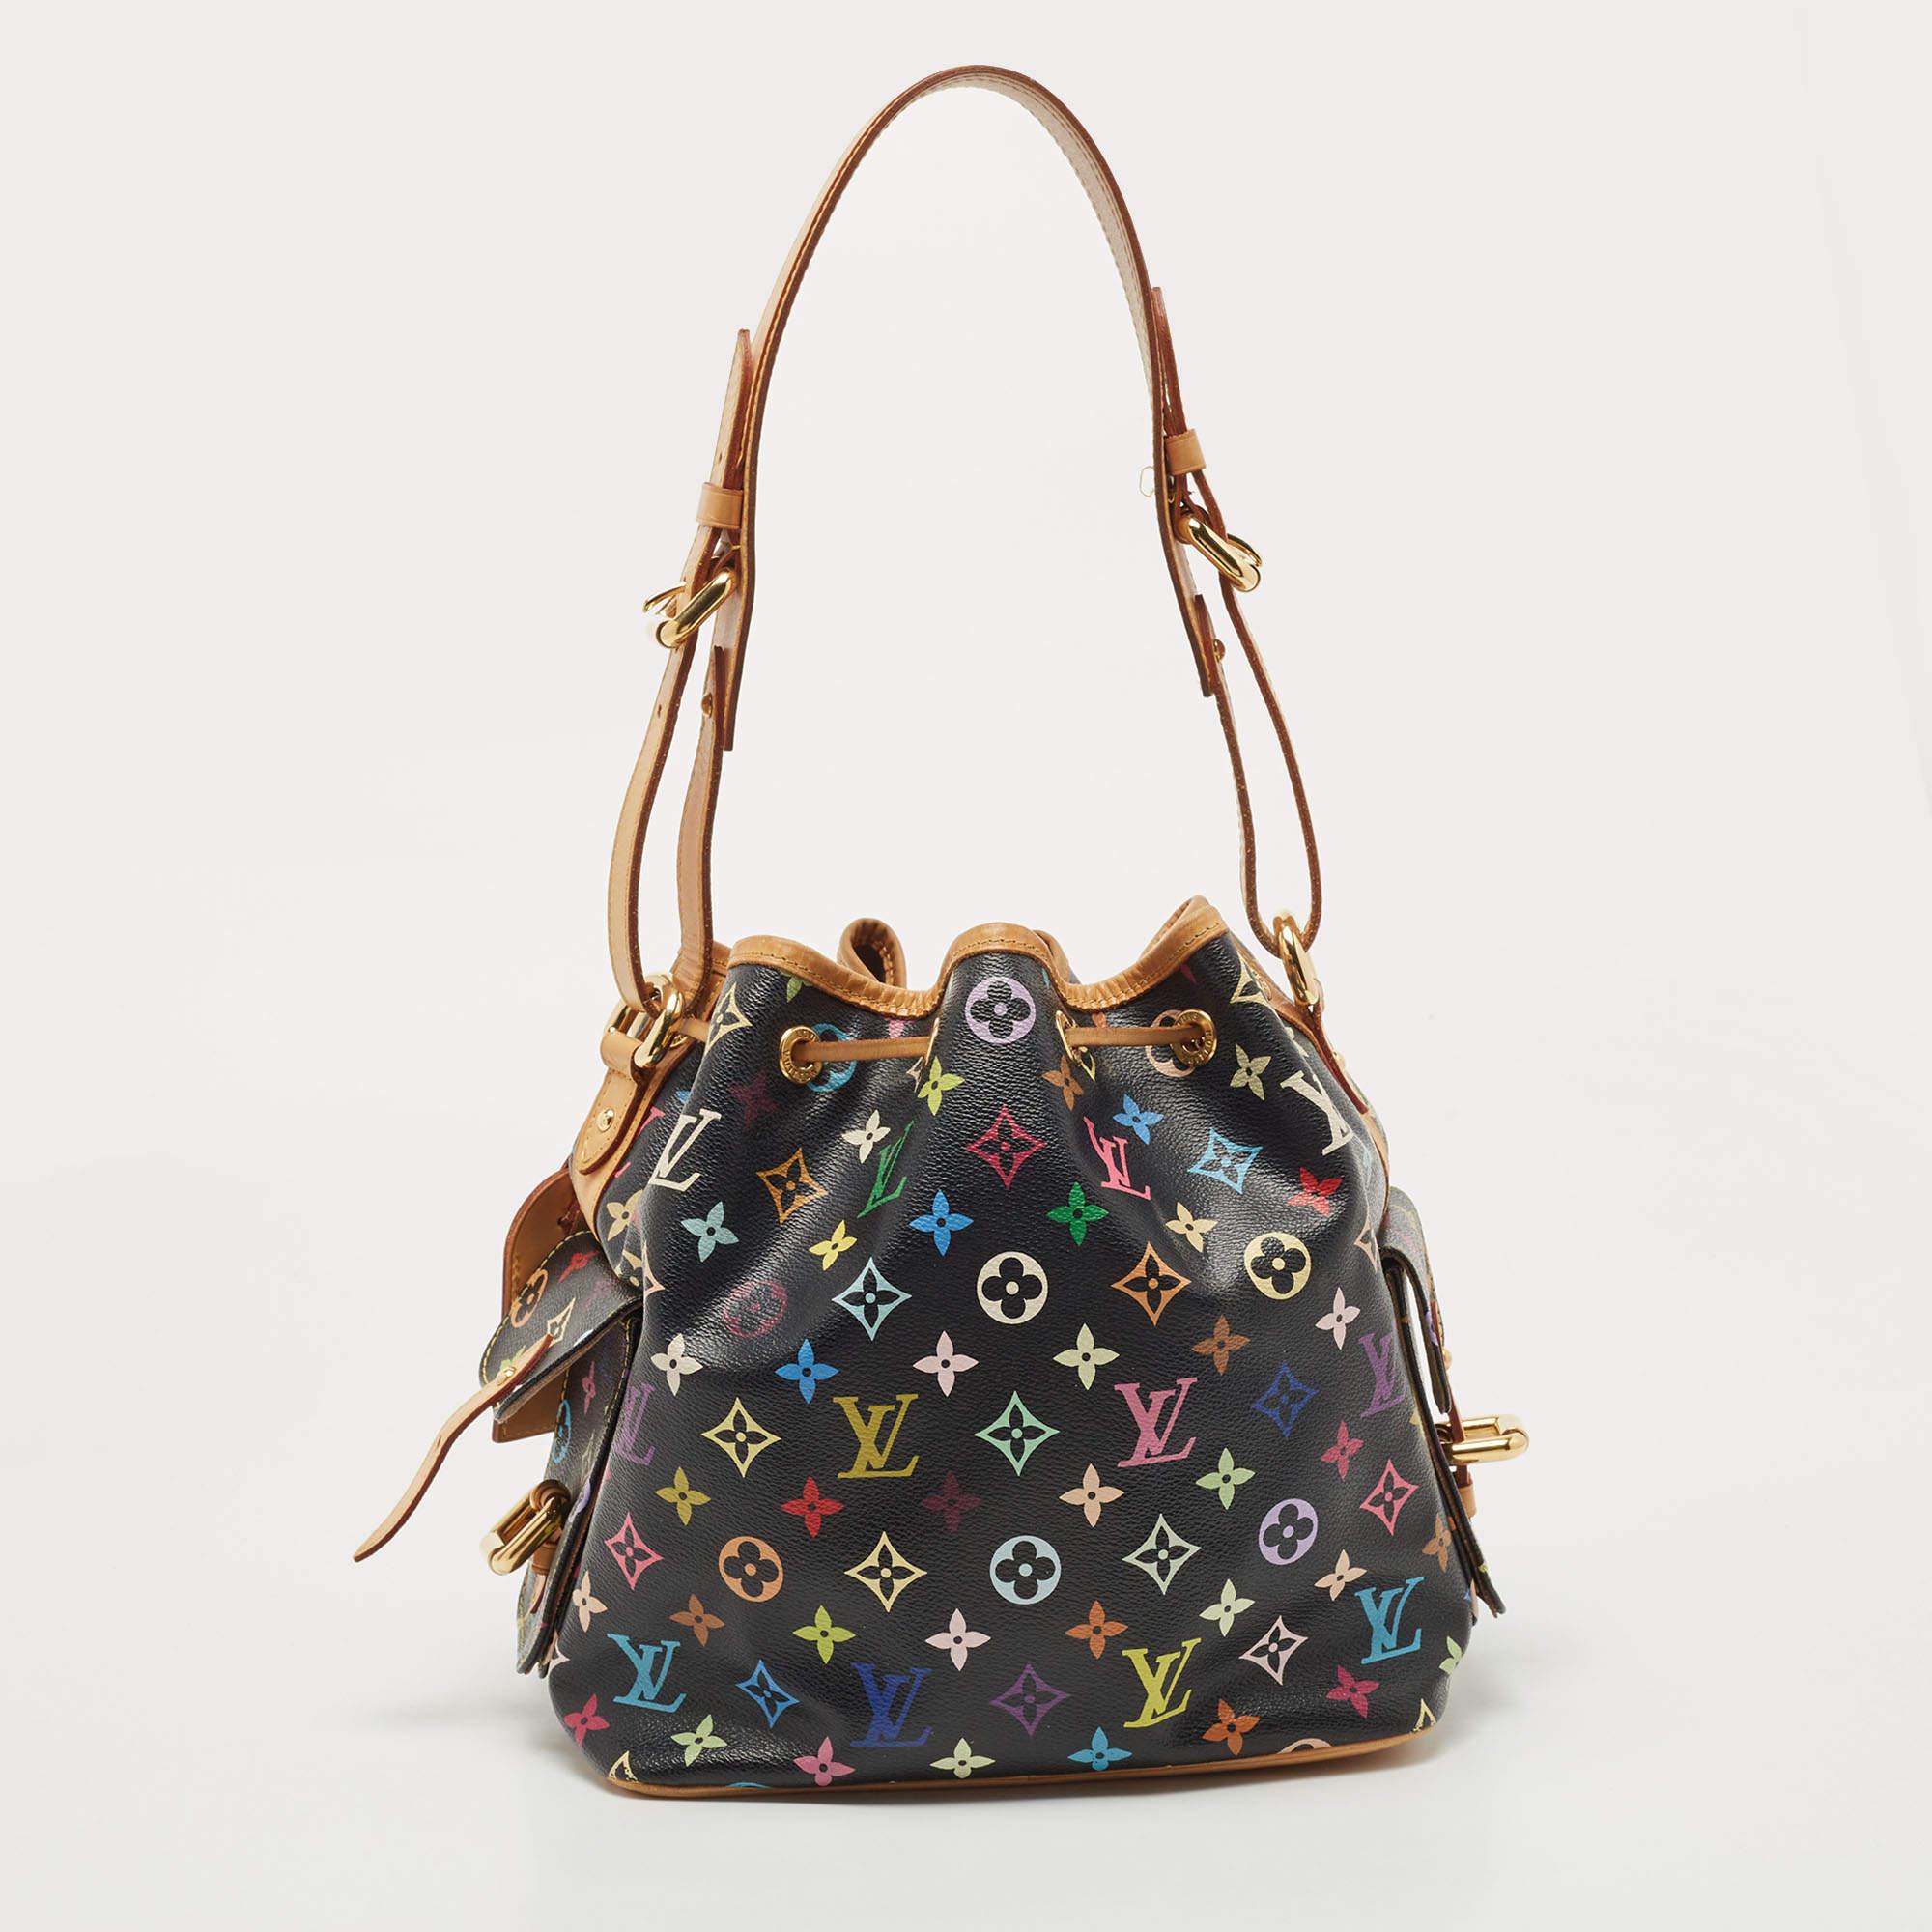 Created in 1932 by Louis Vuitton to carry bottles of Champagne, the iconic Noe now serves as a stylish daytime handbag. Crafted from Multicolor Monogram leather, the white bag exudes just the right amount of sophistication. It has a single